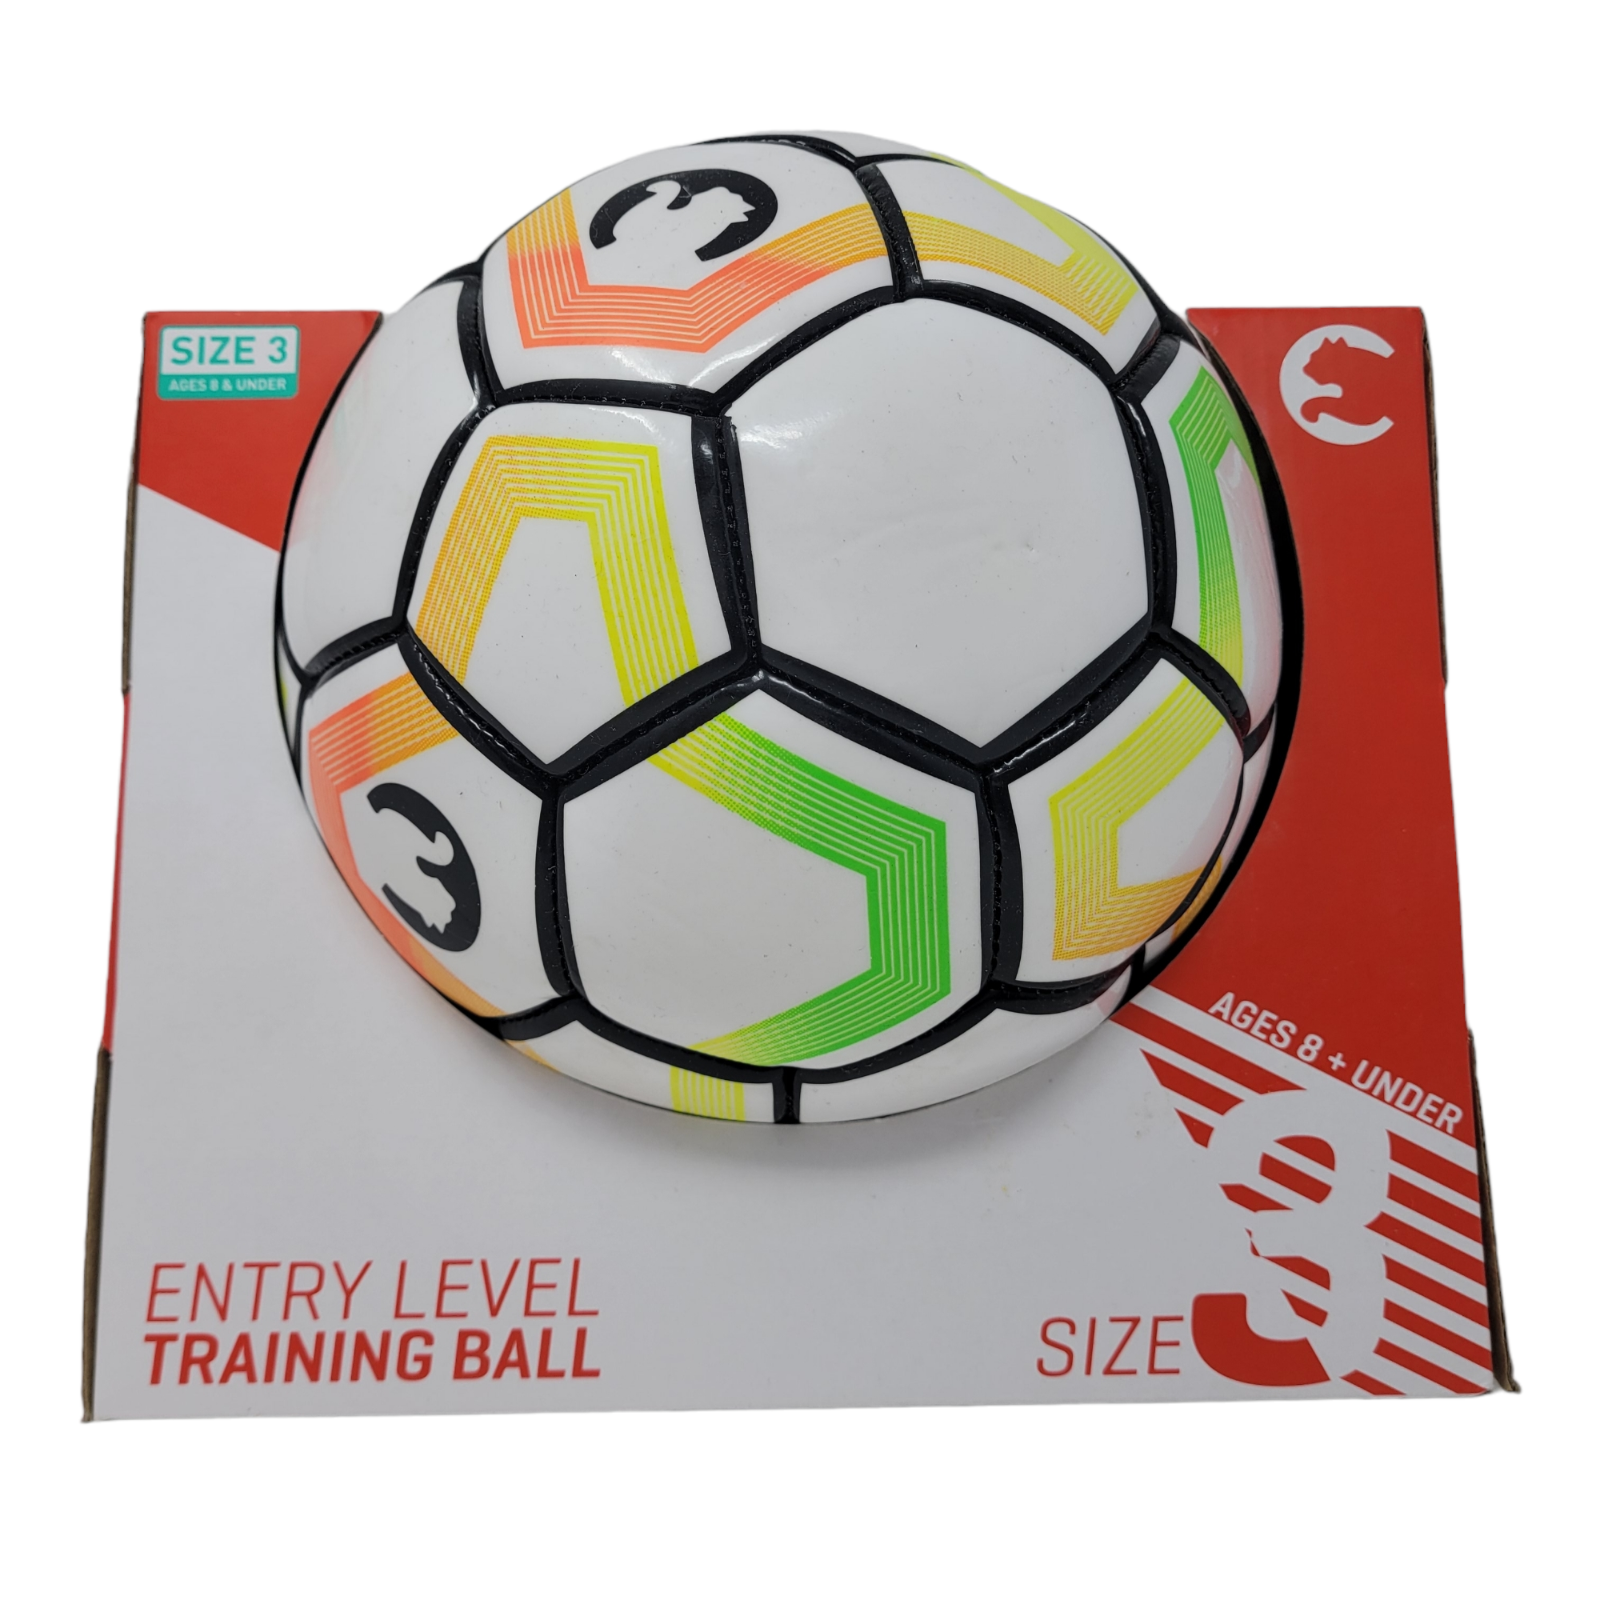 ProCat by Puma Soccer Ball - Size 3 Entry Level Training Ball White New - $14.65